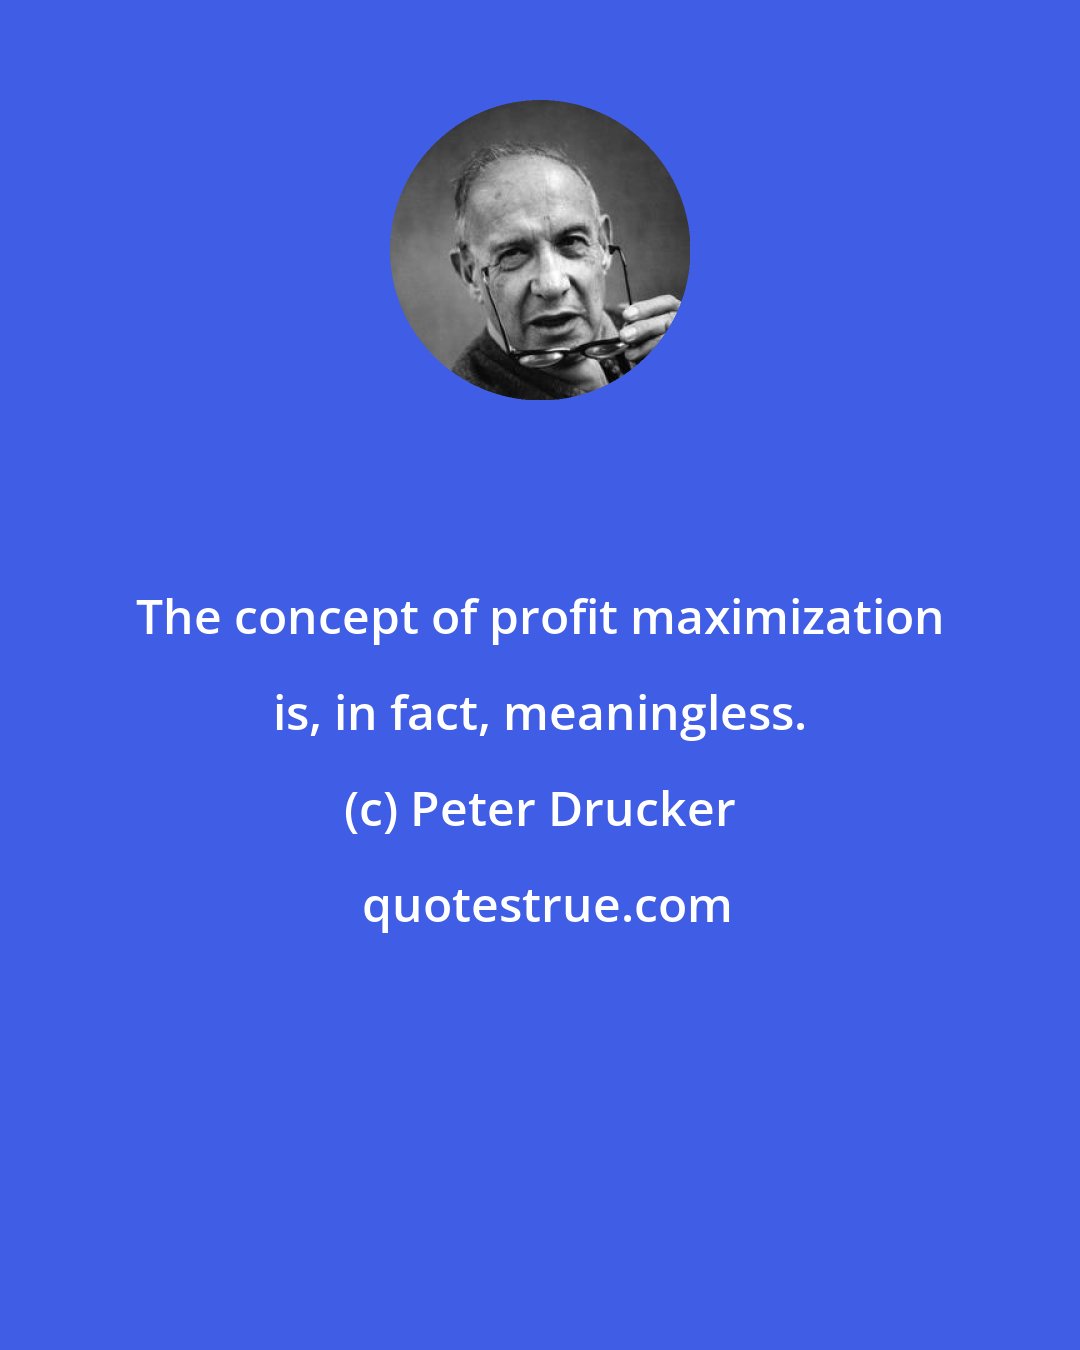 Peter Drucker: The concept of profit maximization is, in fact, meaningless.